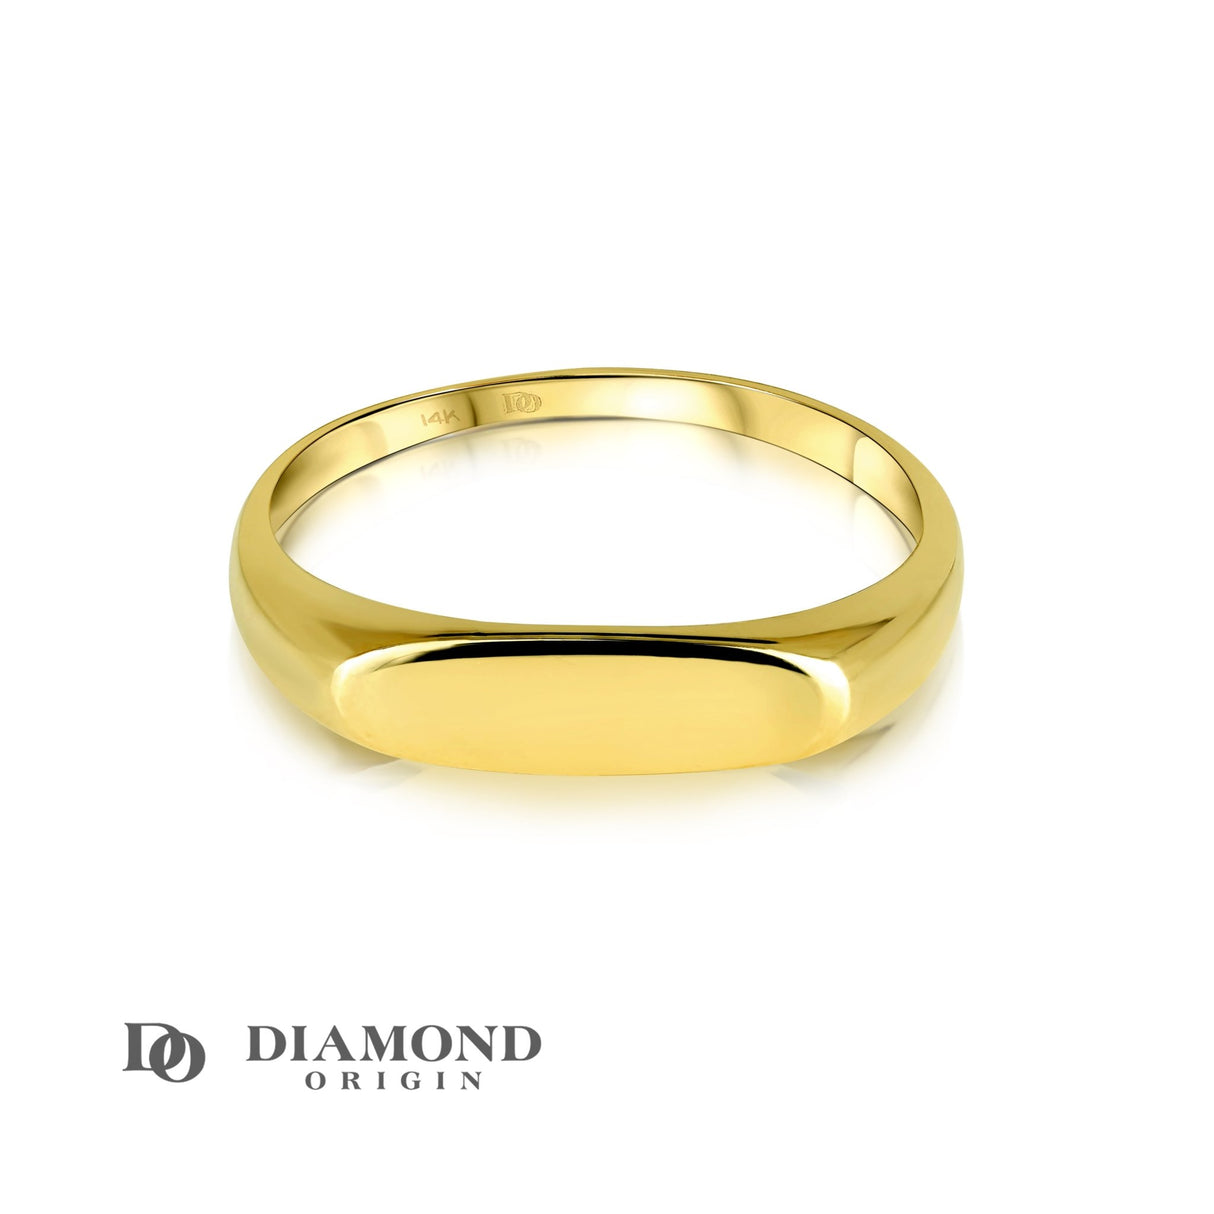 The 14K Gold Long Oval Signet Ring by Diamond Origin is a timeless classic that has been reimagined with a modern twist. This piece embodies the perfect blend of tradition and innovation that is characteristic of the Diamond Origin brand, gold stackable ring, gold rings, solid gold rings, 14K gold Ring,